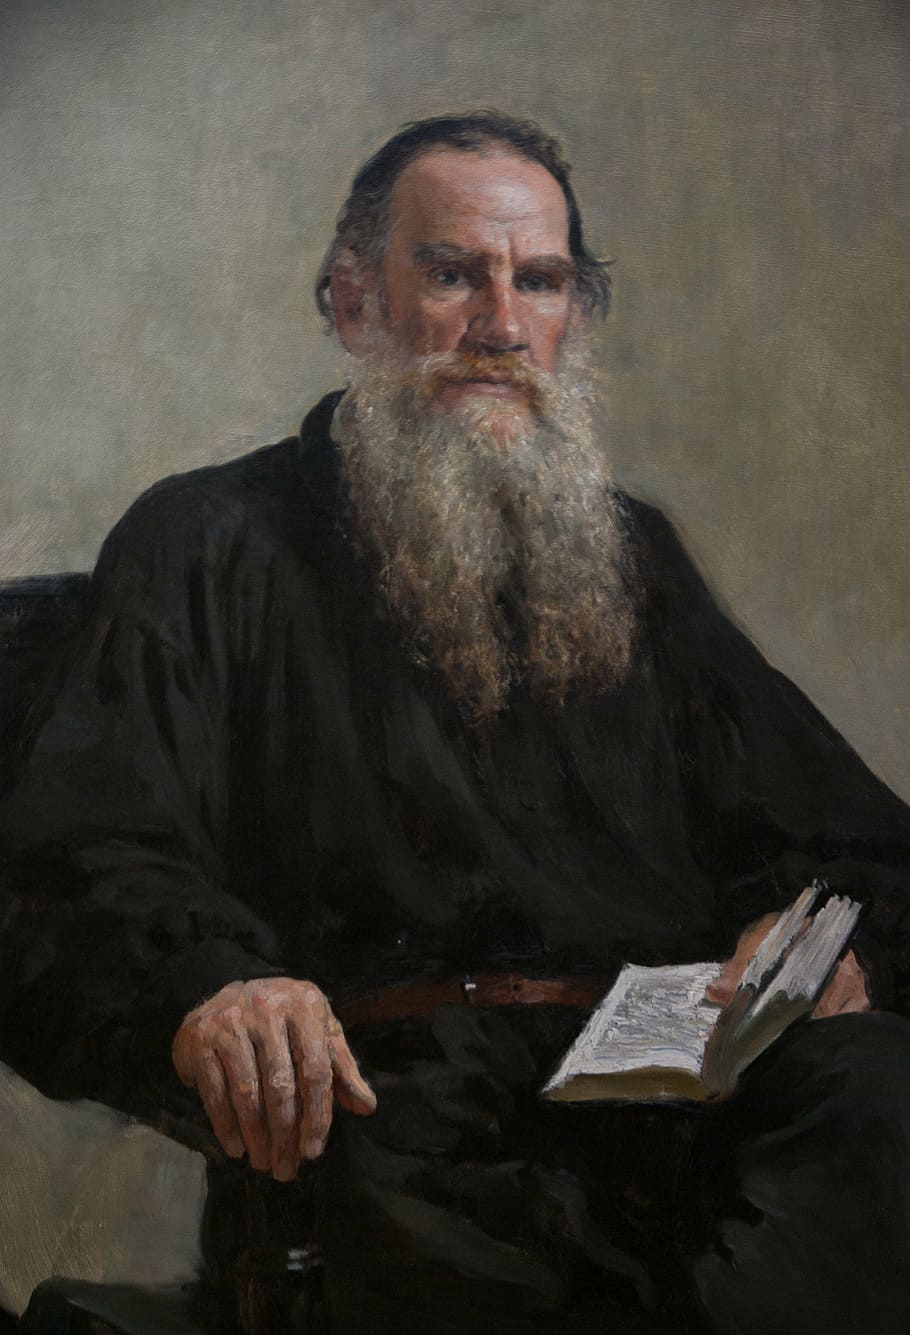 man holding book painting, moscow, tolstoy, writer, table, only men